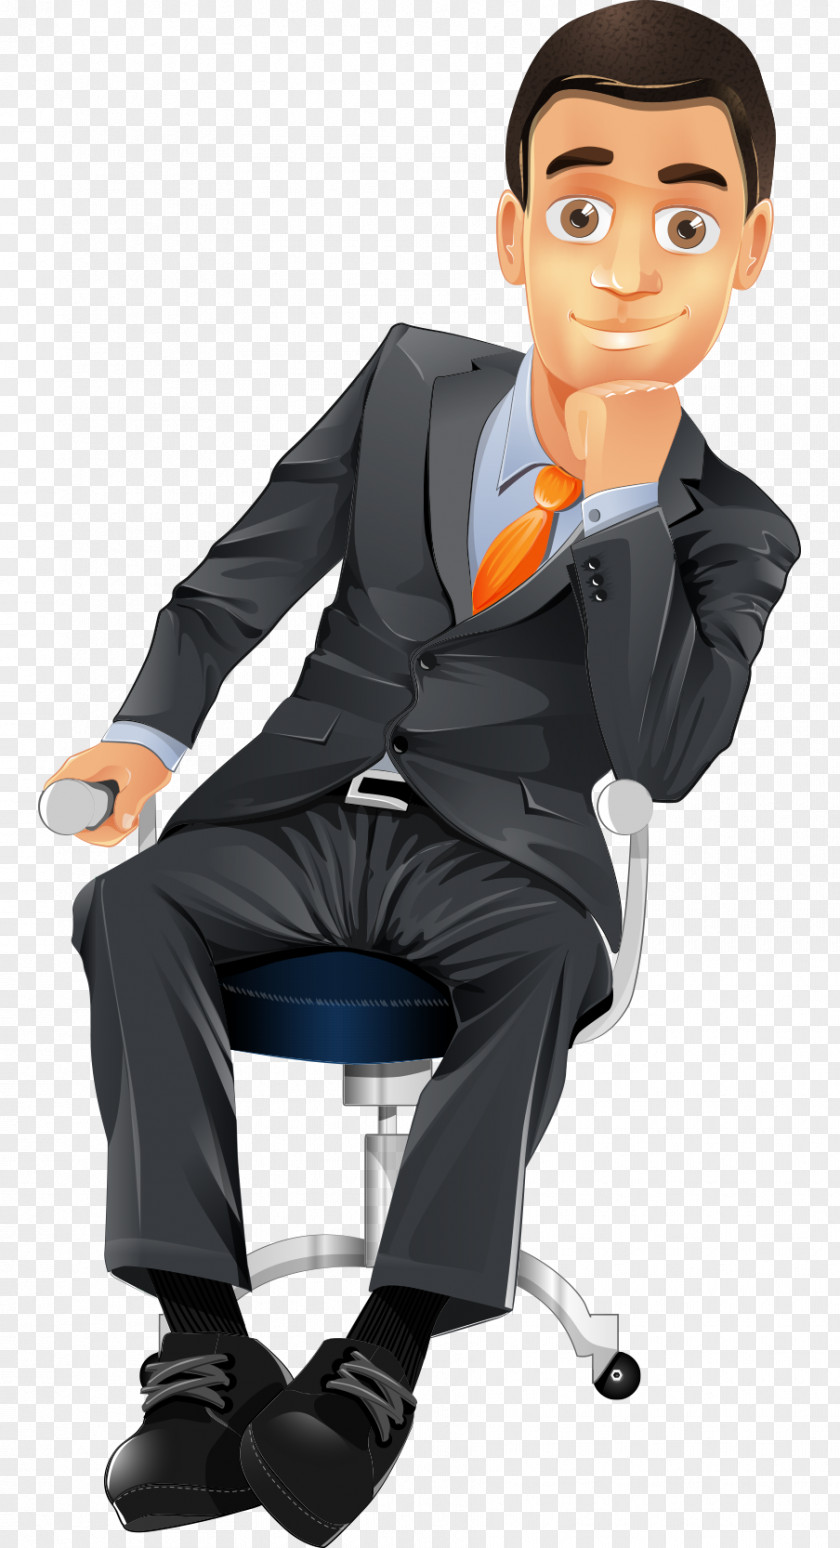 Hand-painted Cartoon Business Man Sitting On A Chair Character Businessperson PNG